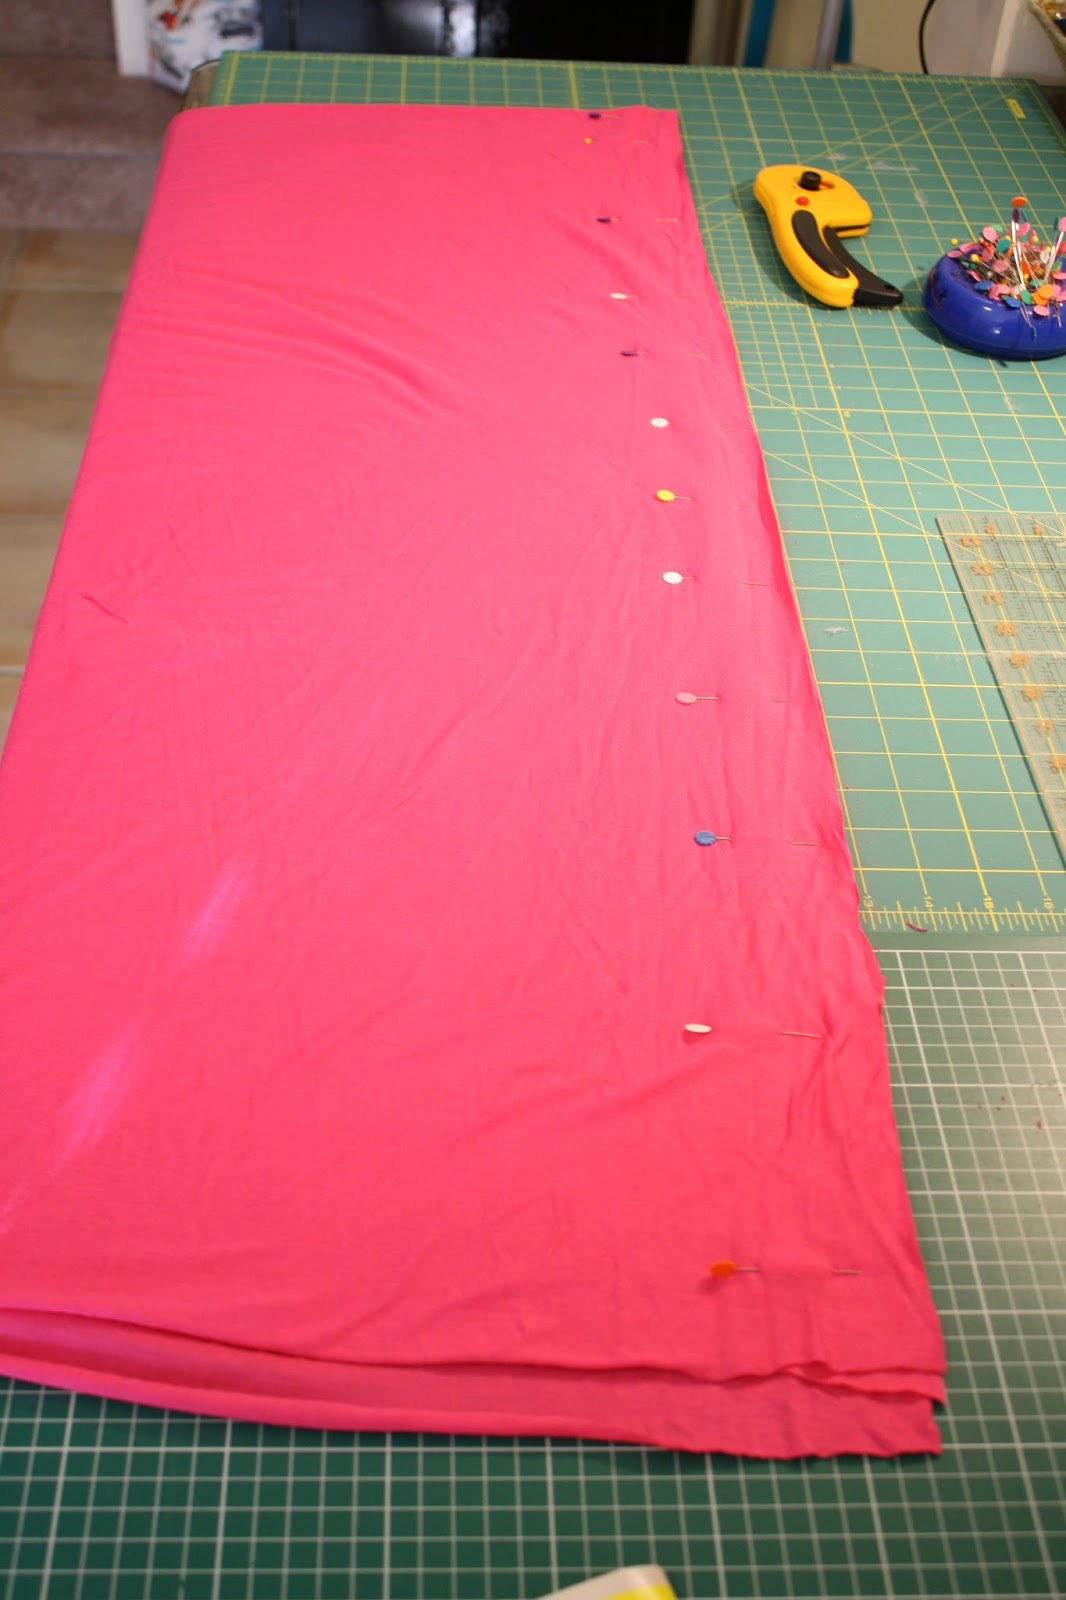 sewhungryhippie: How to sew a maxi skirt in 30 minutes or less